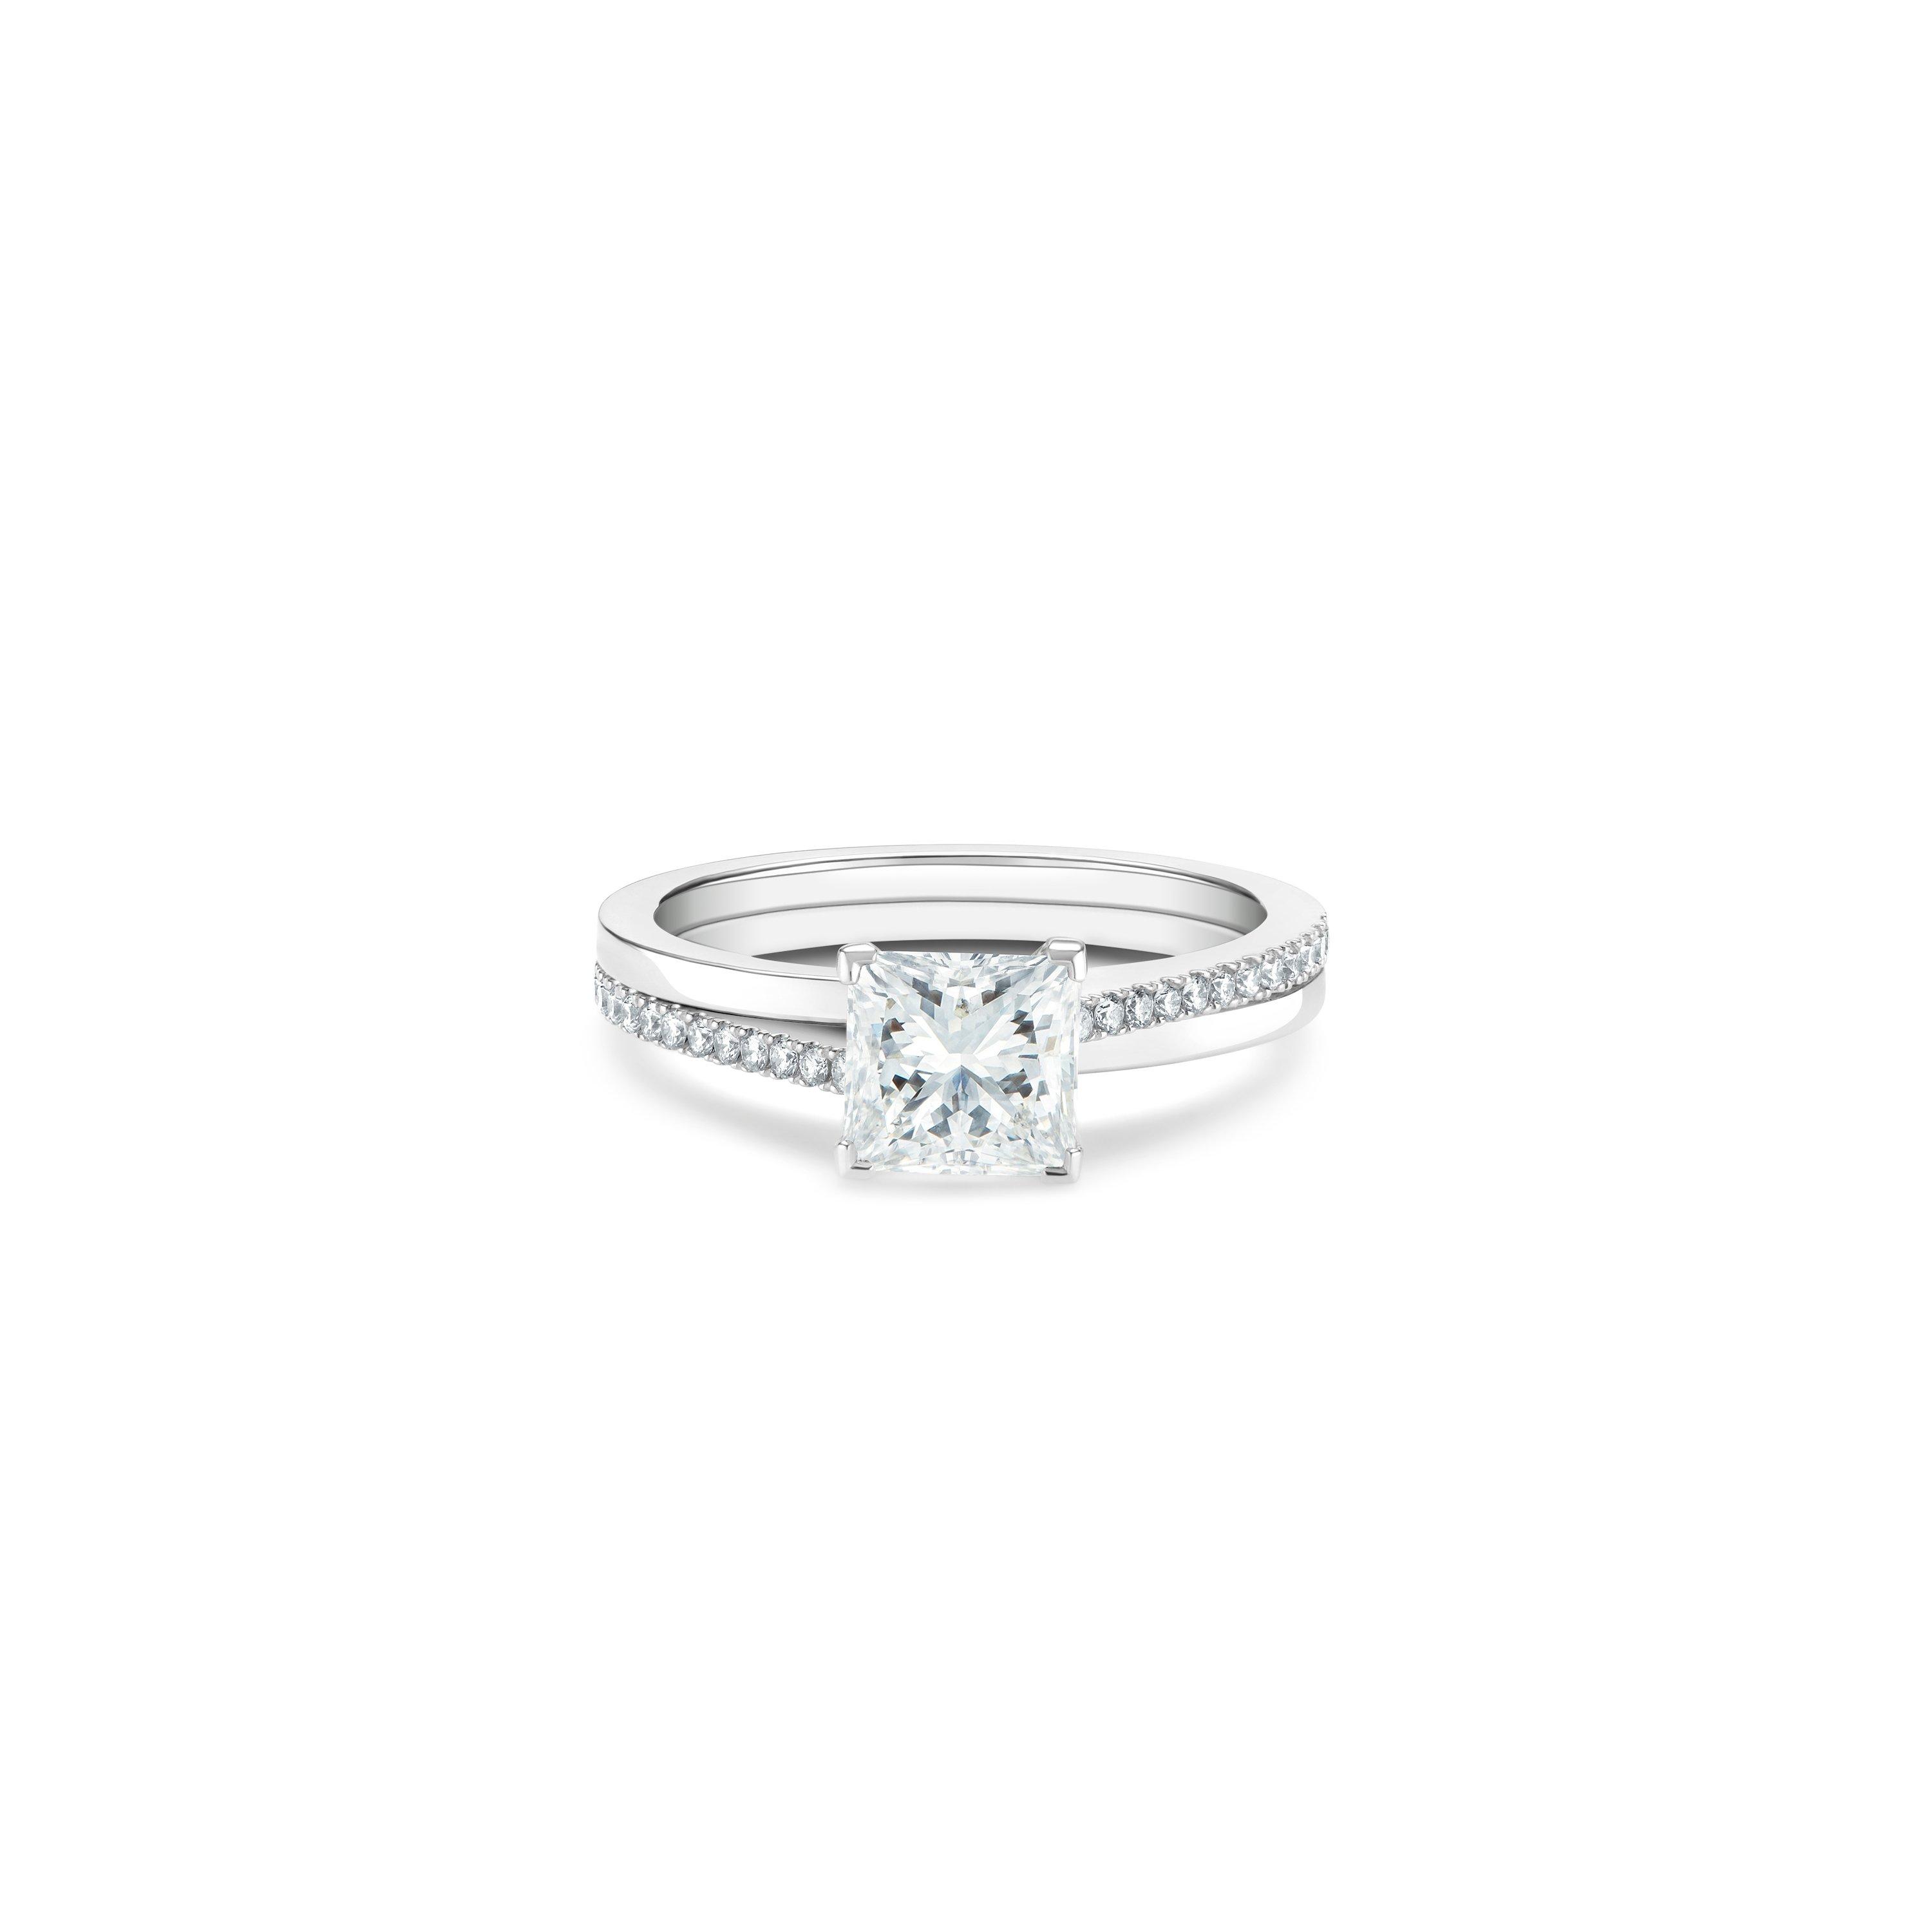 Solitaire The Promise diamant taille princesse